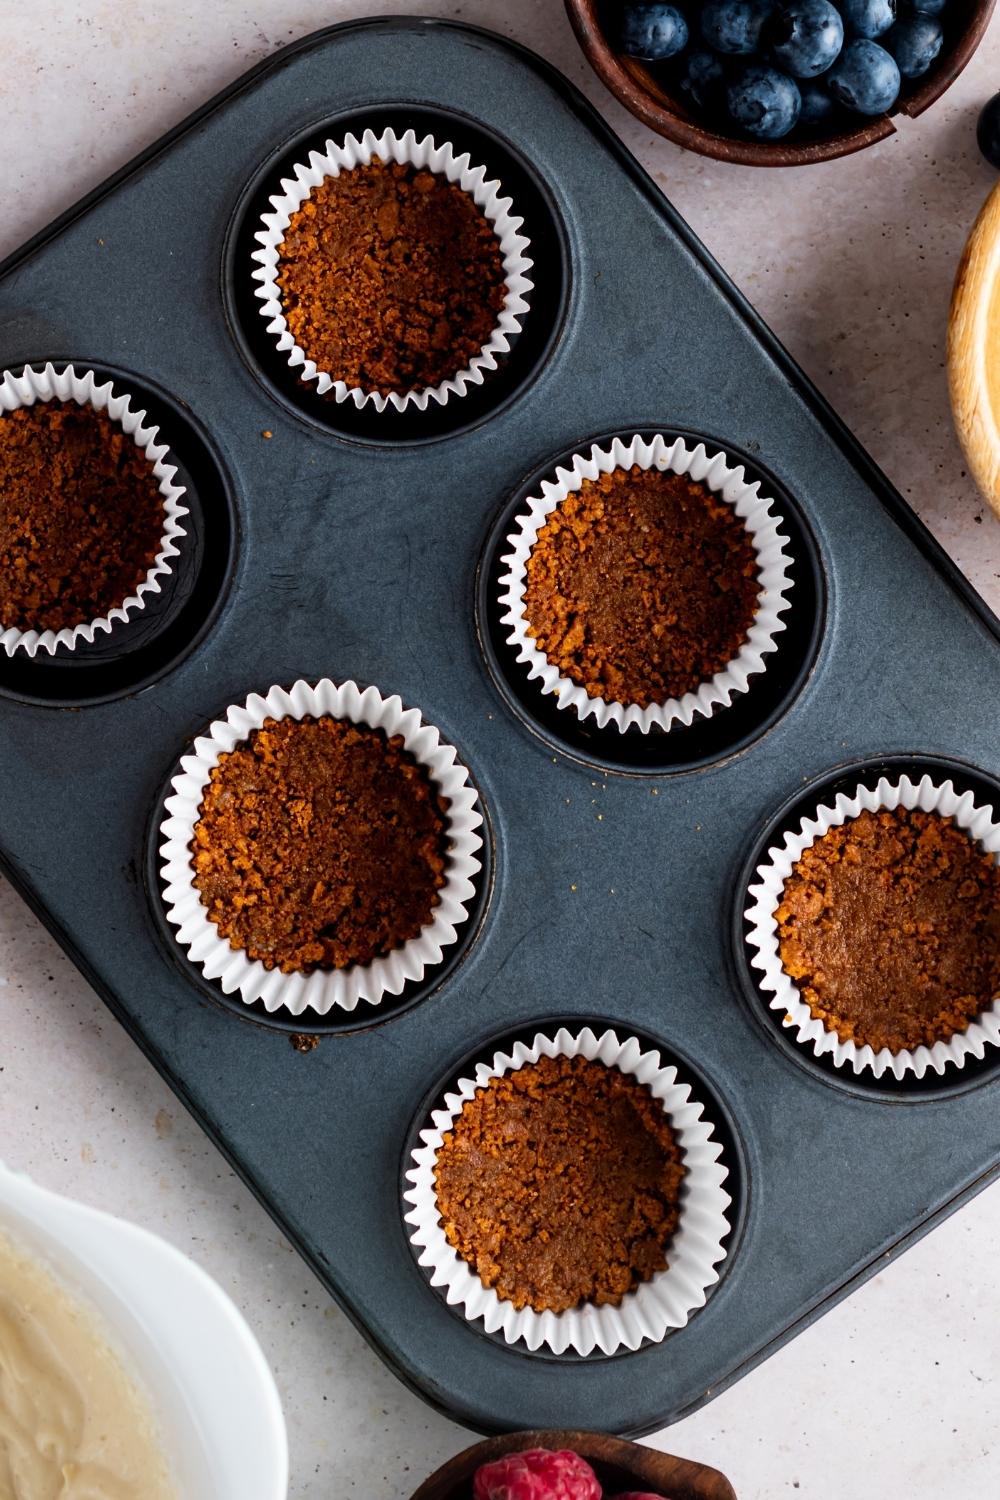 A muffin pan with graham cracker crust pressed in each muffin liner.